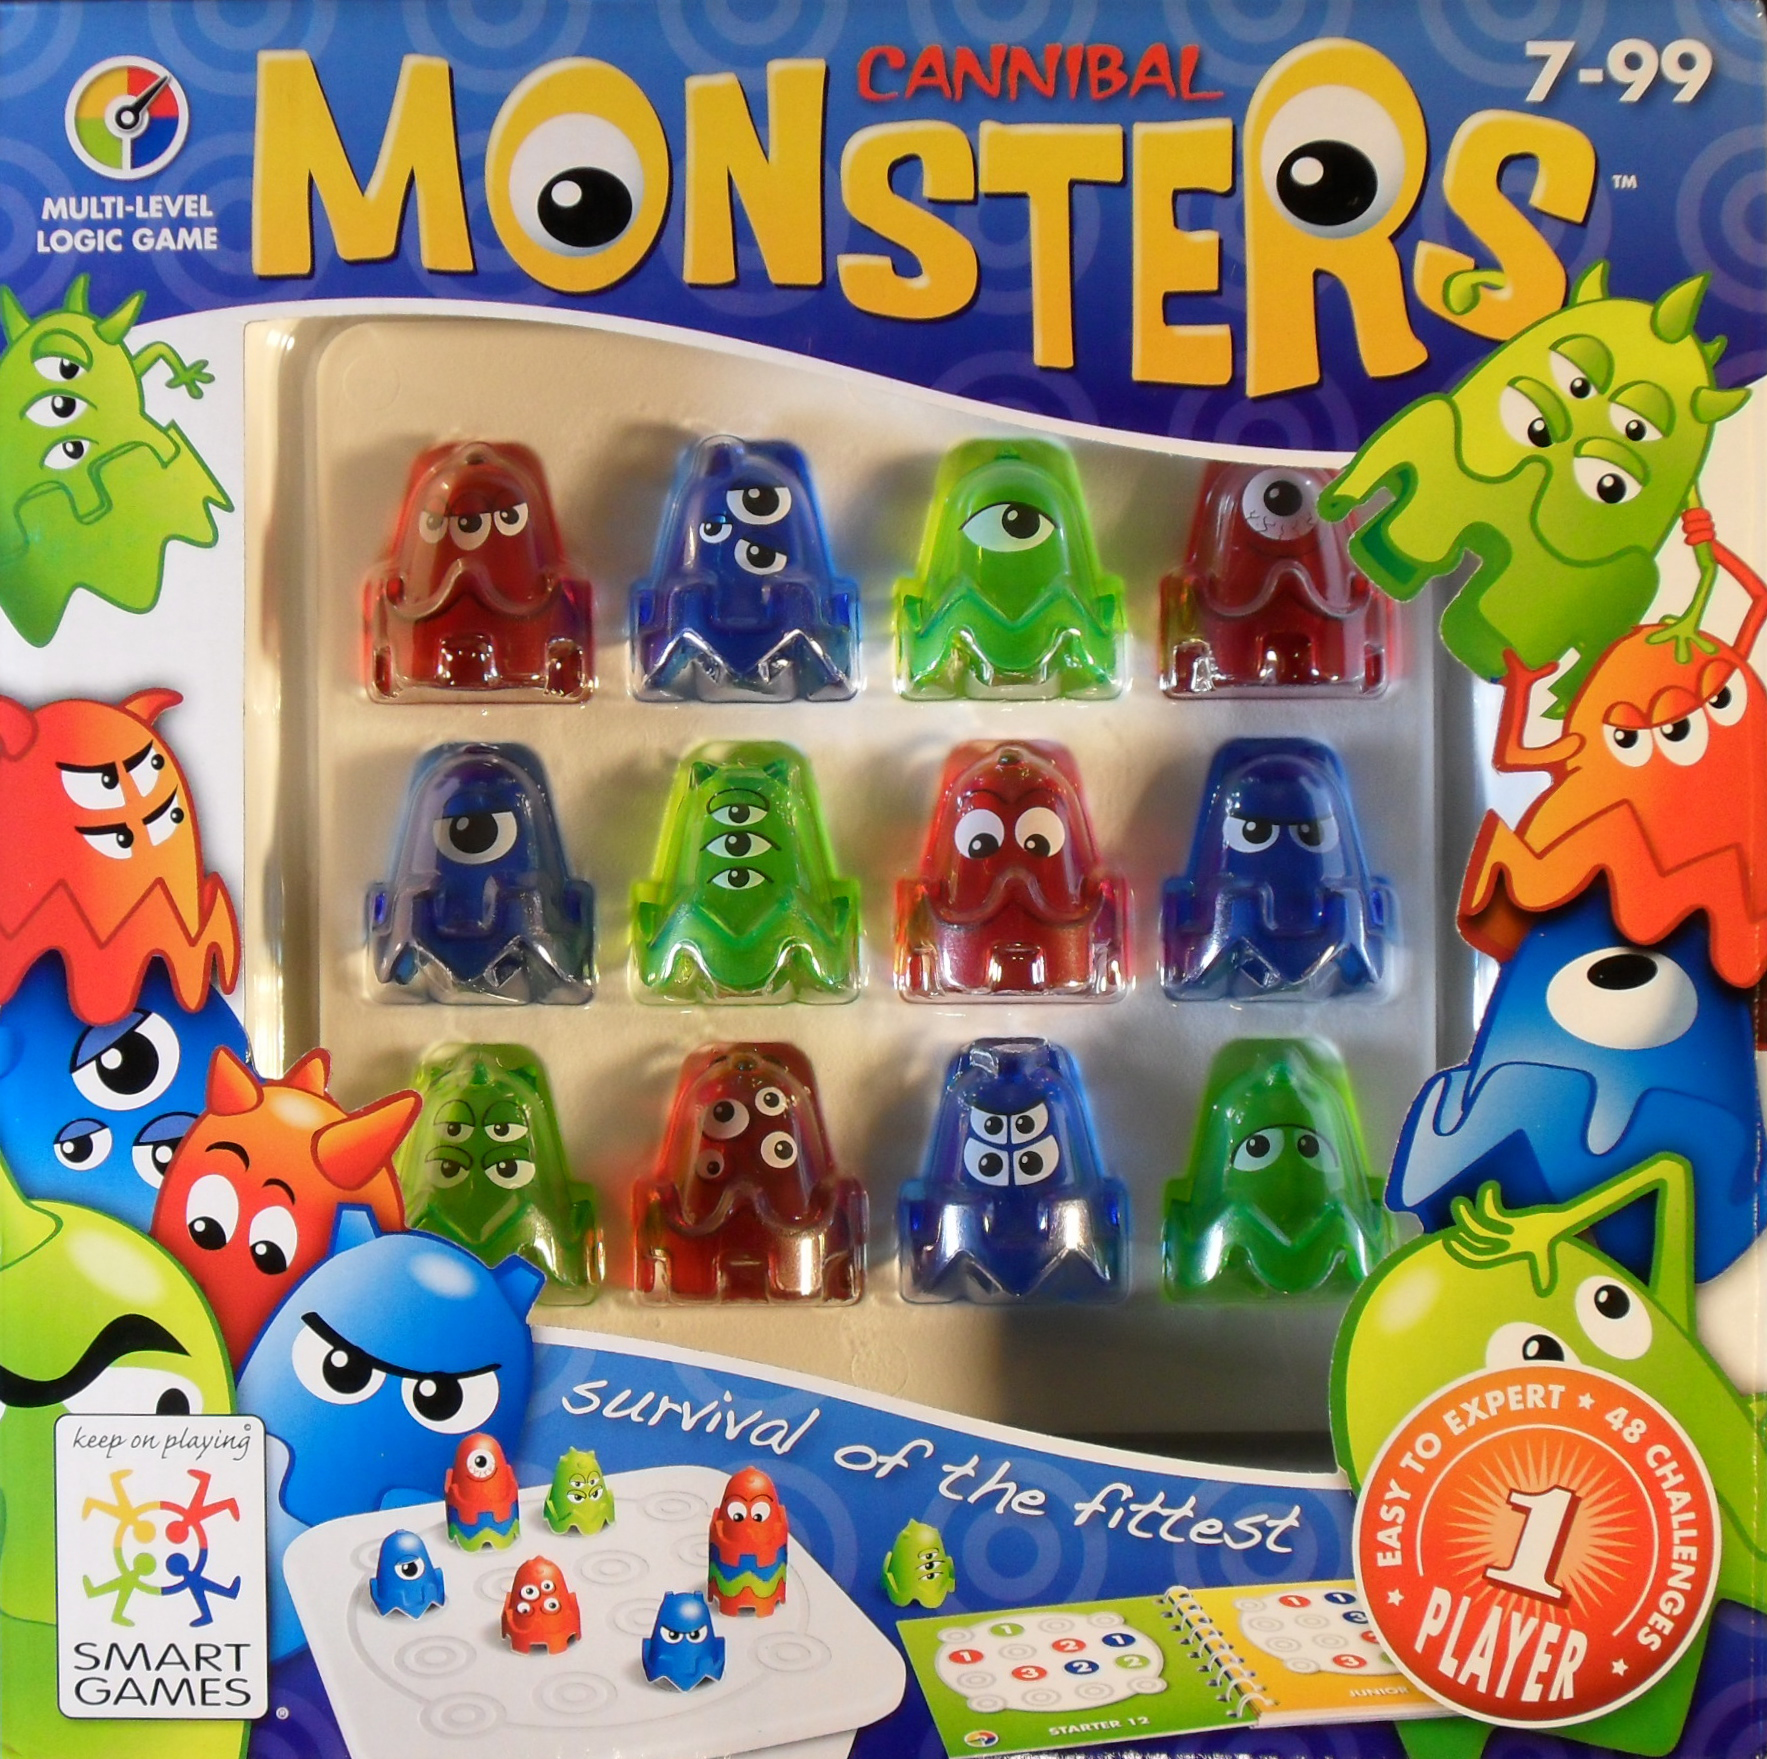 Cannibal Monsters